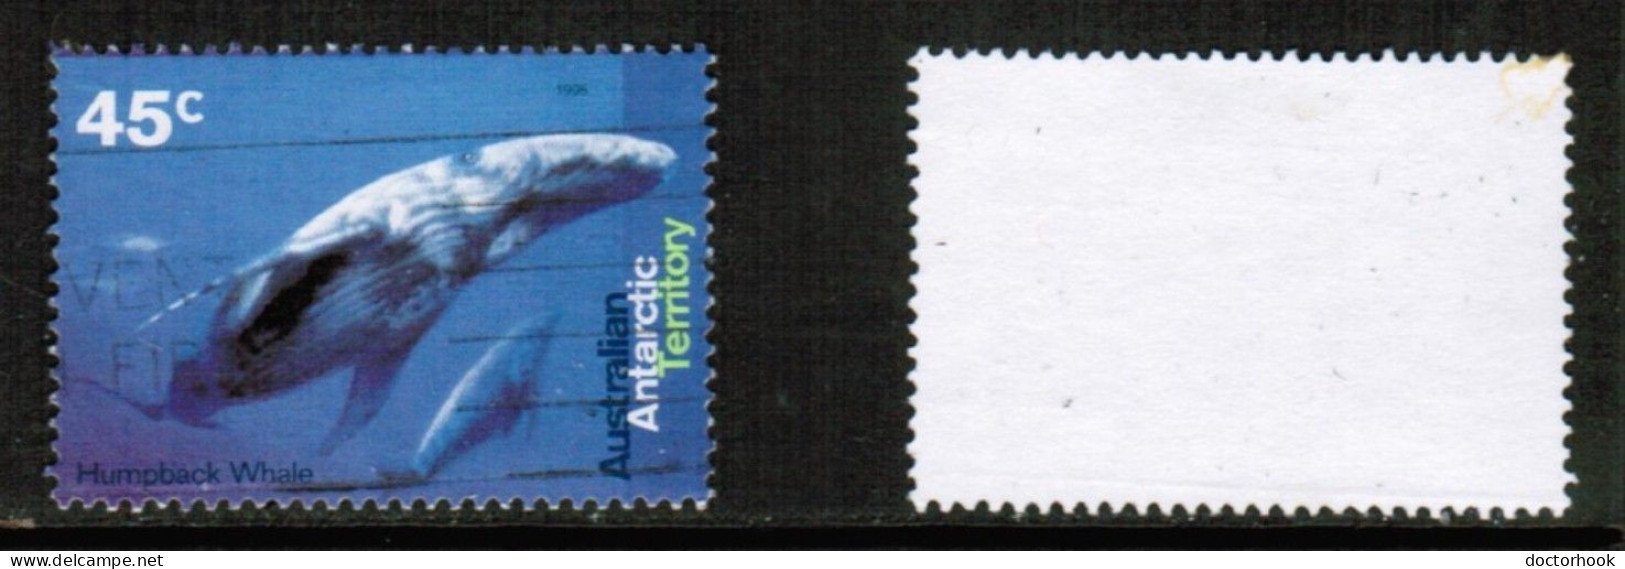 AUSTRALIAN ANTARCTIC TERRITORY   Scott # L 94 USED (CONDITION AS PER SCAN) (Stamp Scan # 929-5) - Oblitérés